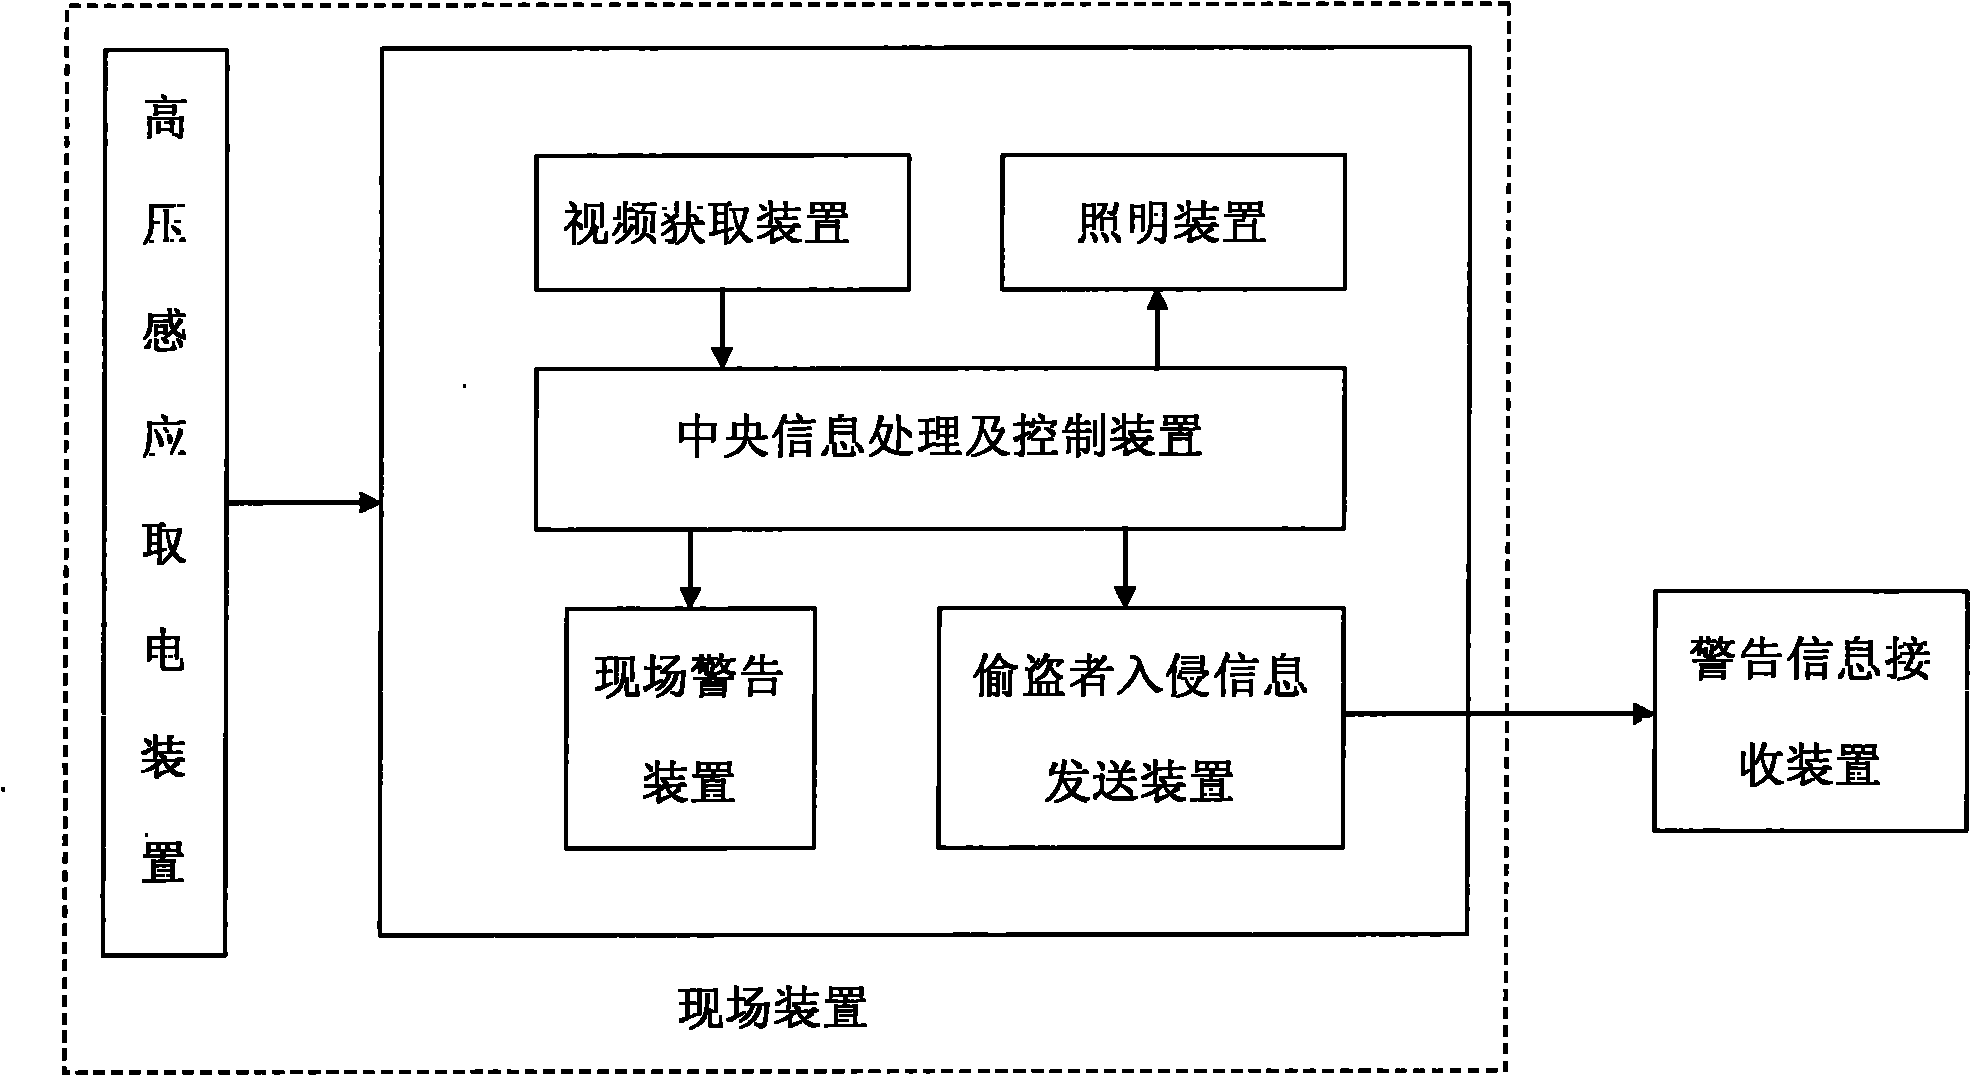 Intelligent burglary prevention monitoring method and device for high-voltage power transmission tower